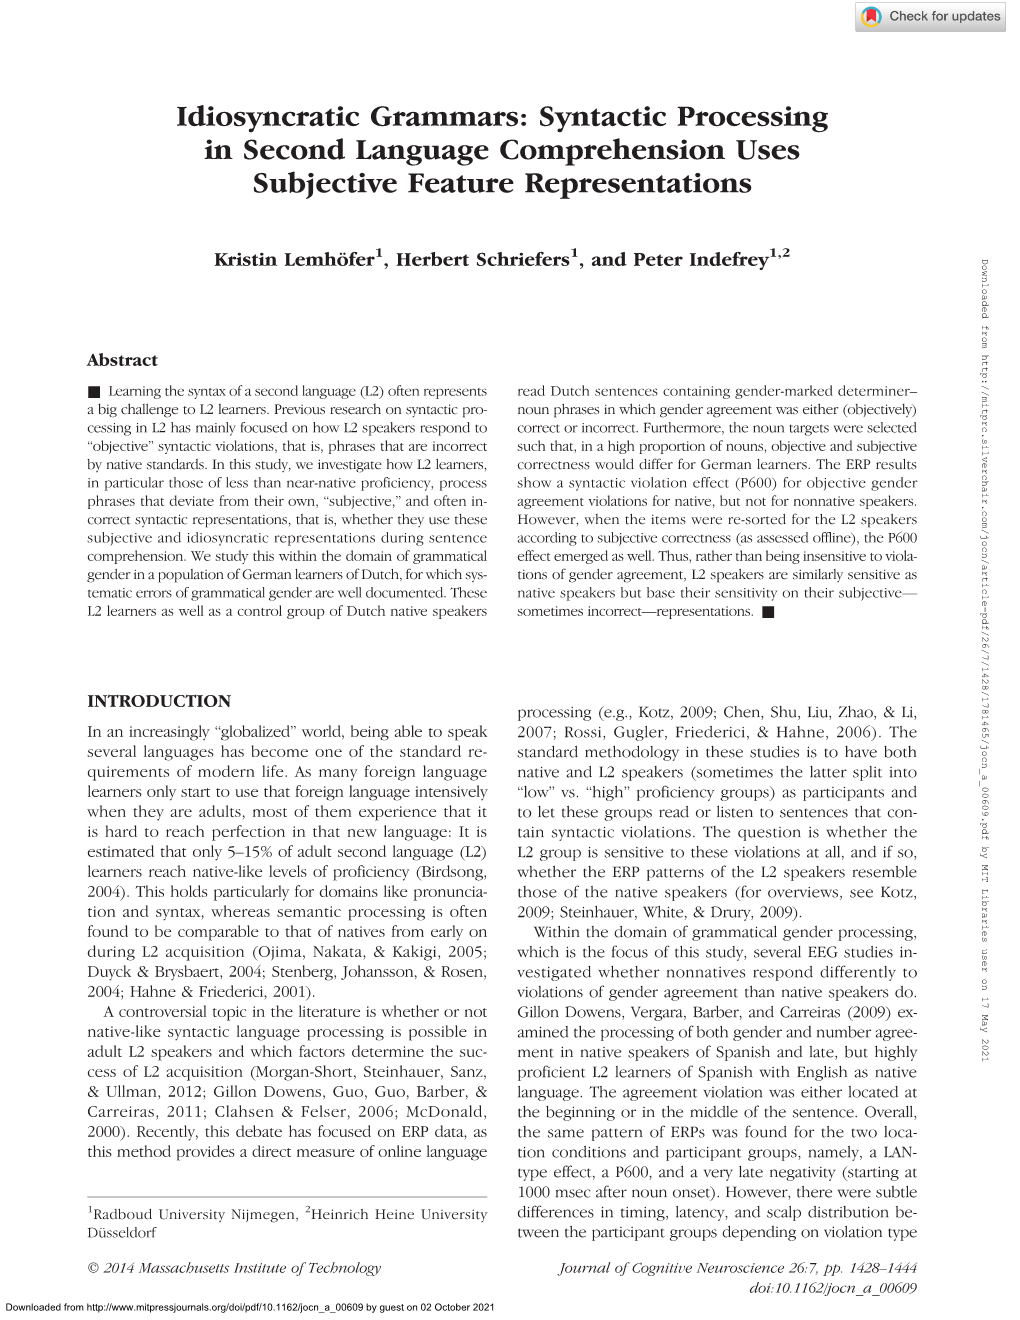 Syntactic Processing in Second Language Comprehension Uses Subjective Feature Representations